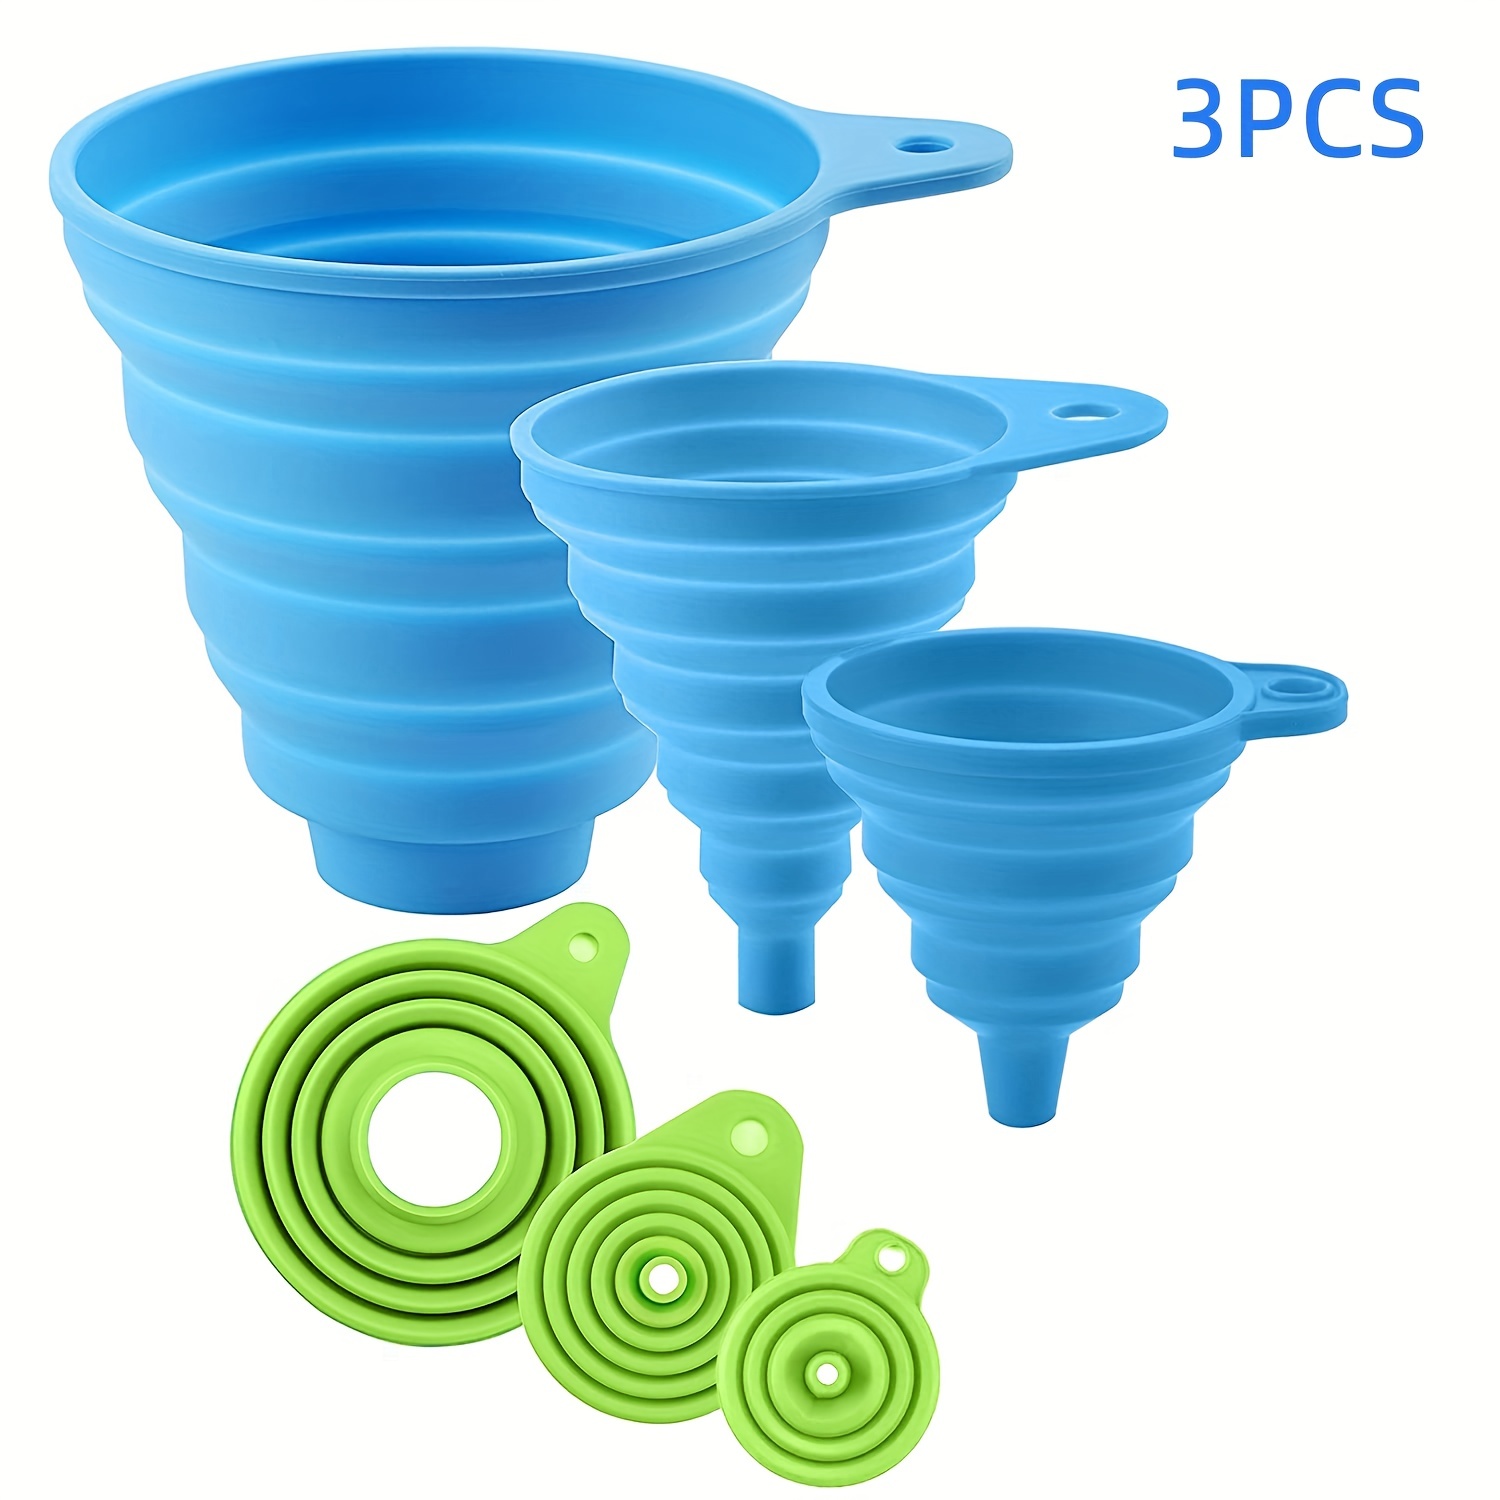 

3pcs Portable Silicone Funnel For Kitchen And Wine - Collapsible And Foldable For Easy Storage And Transportation